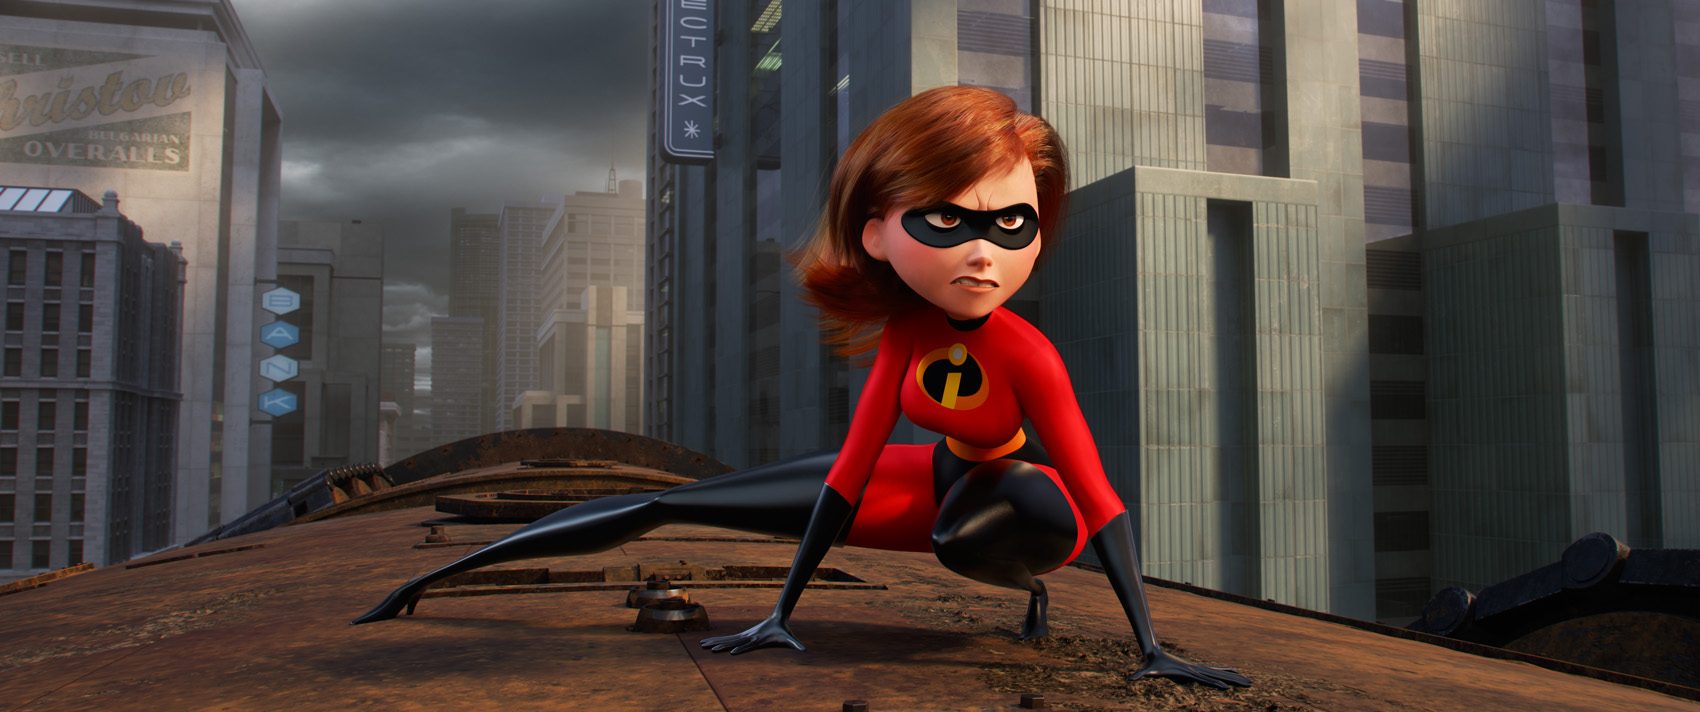 SHE'S BACK. Elastigirl may have hung up her supersuit when the supers were lying low, but in 'Incredibles 2,' she's recruited to lead a campaign to bring them back into the spotlight. With the full support of her family behind her, Helen finds she's still at the top of her game when it comes to fighting crime.  